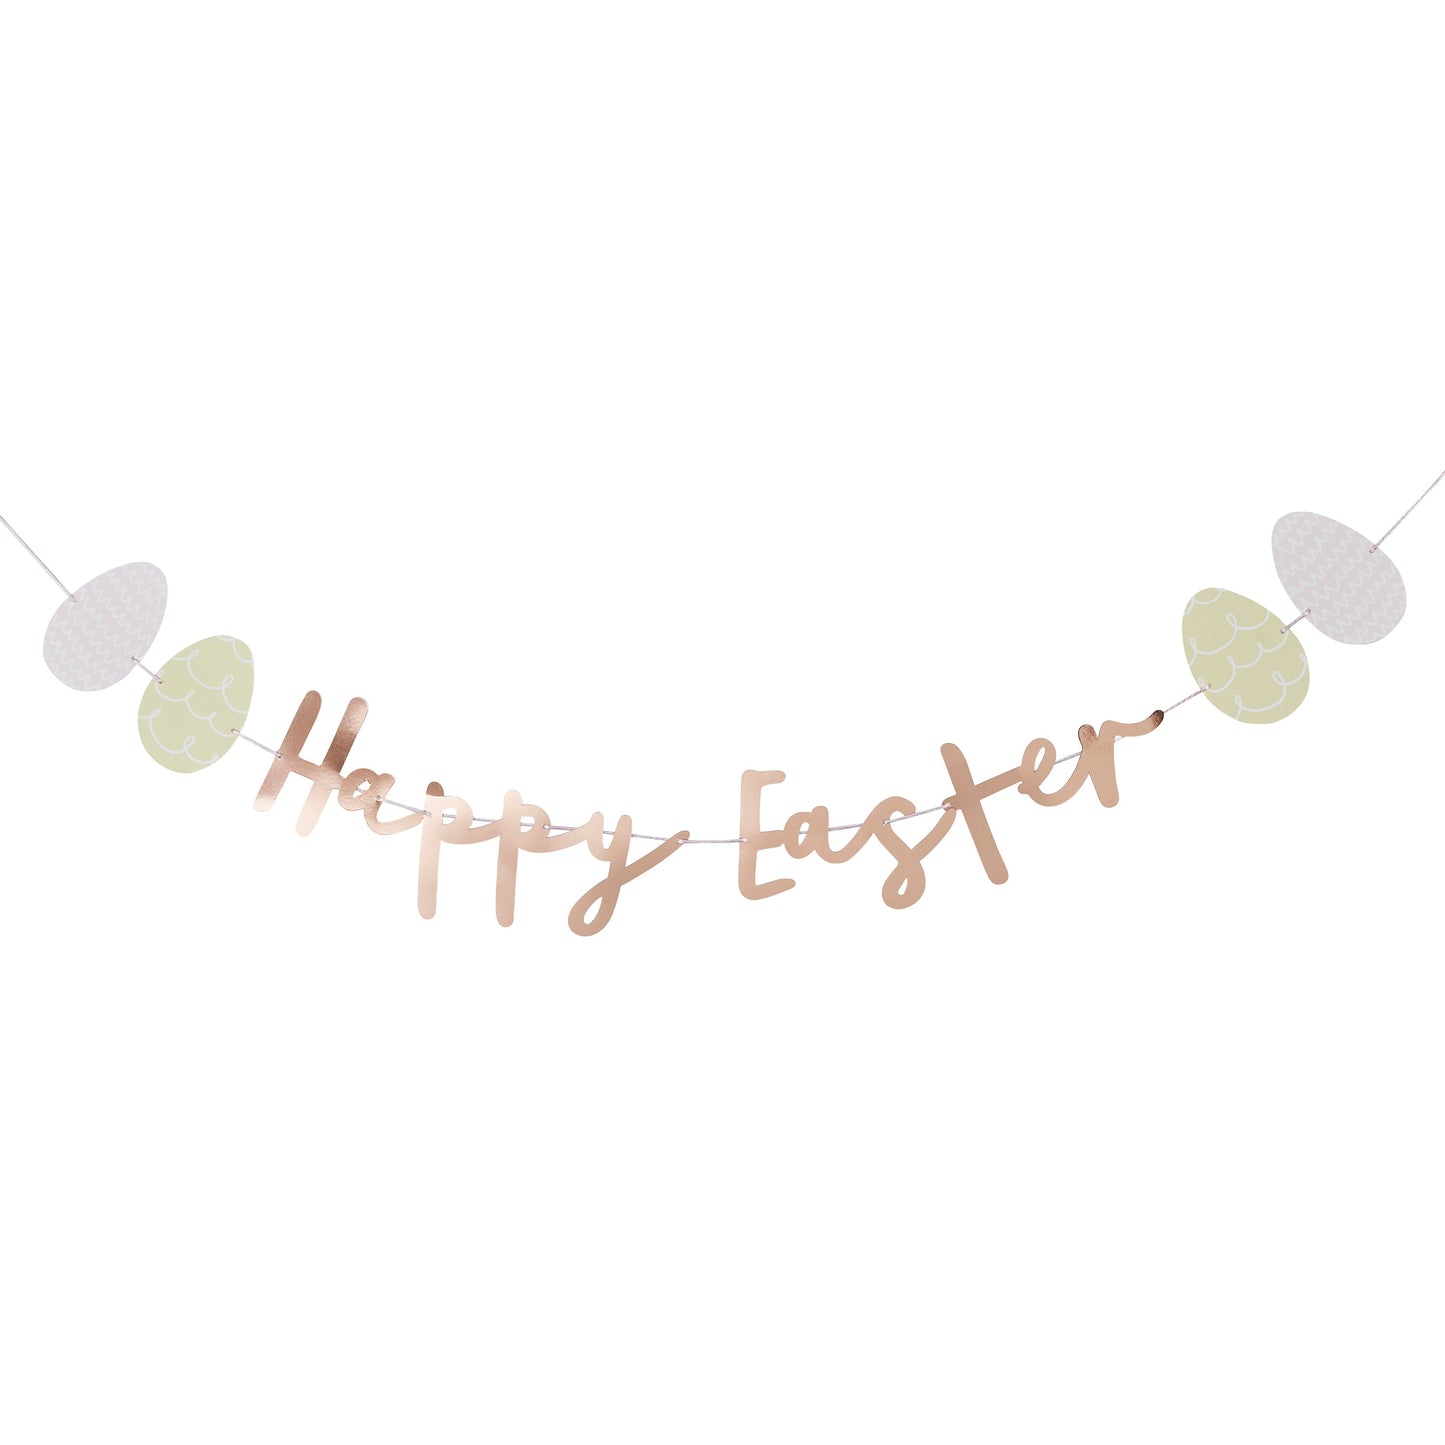 Hootyballoo 'Happy Easter' Egg Banner 2M Easter Banner Partyware Decoration